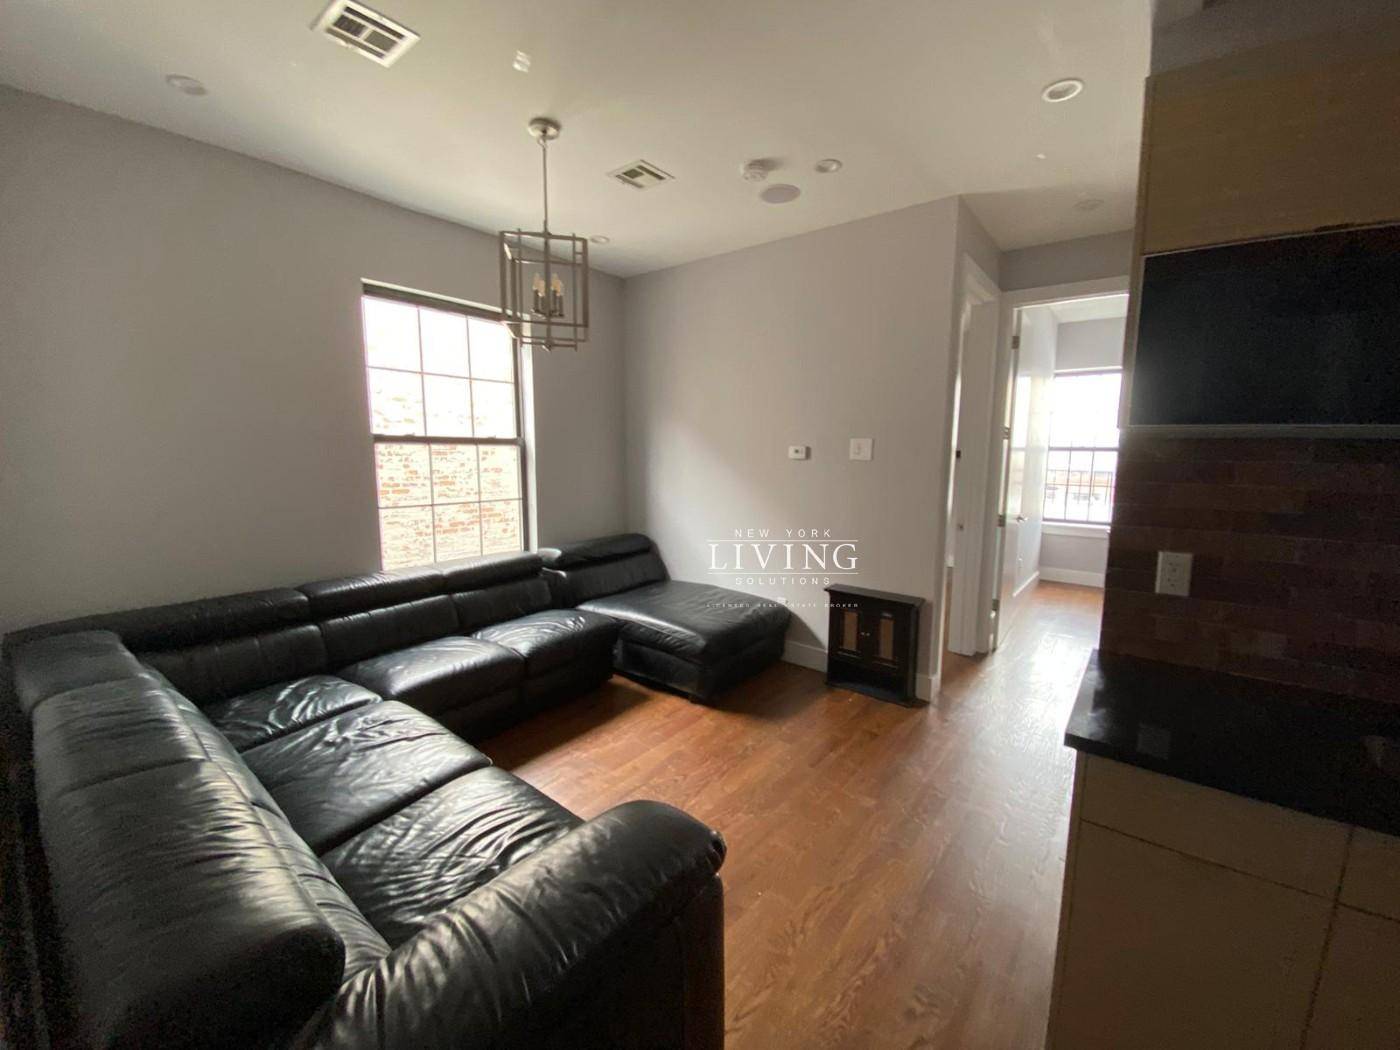 Take a look at the stunning 4 bedroom with spacious common areas and natural light throughout conveniently located near the border of Williamsburg, Bushwick, and Ridgewood.